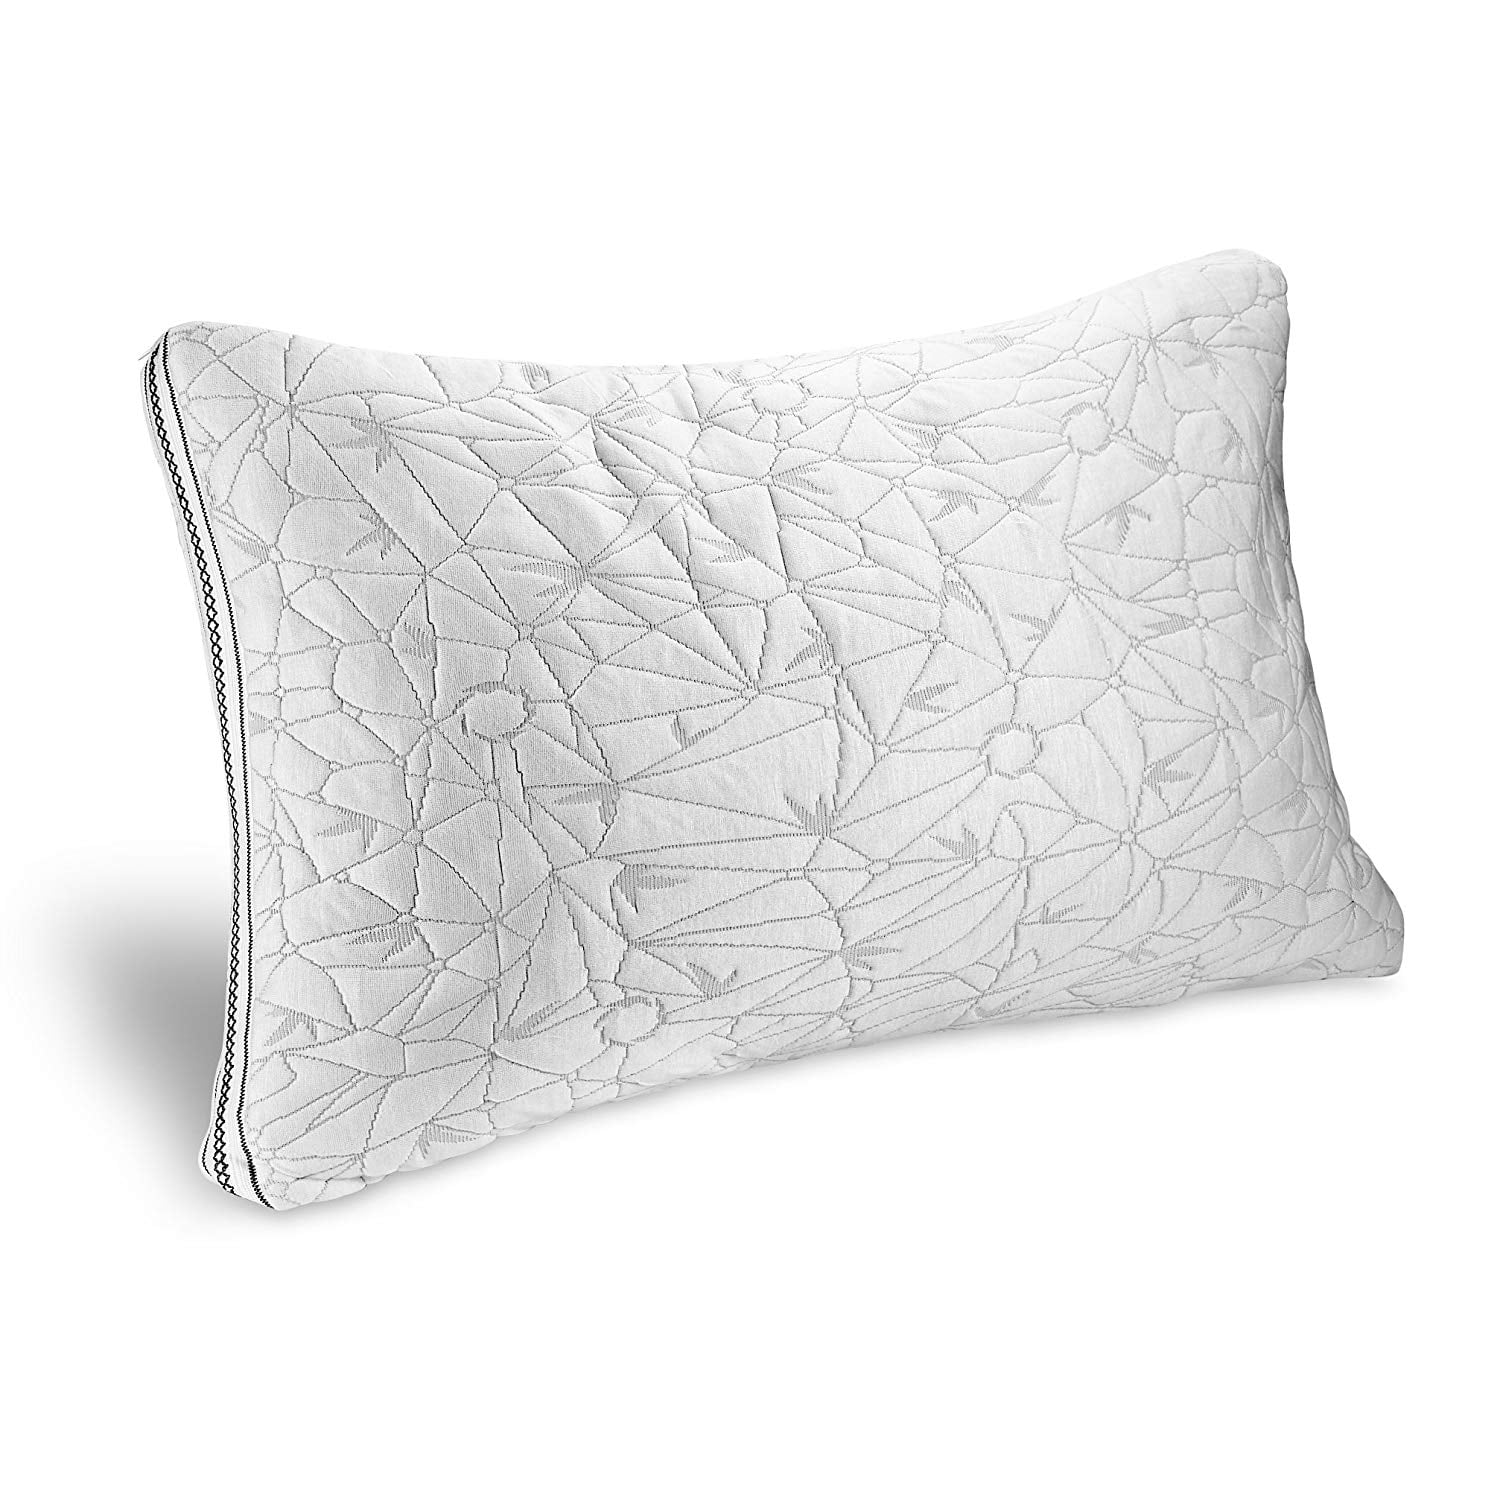 Pillow Memory Foam SINGLE Core Orthopaedic Luxury Extra Support Firm Serenity 